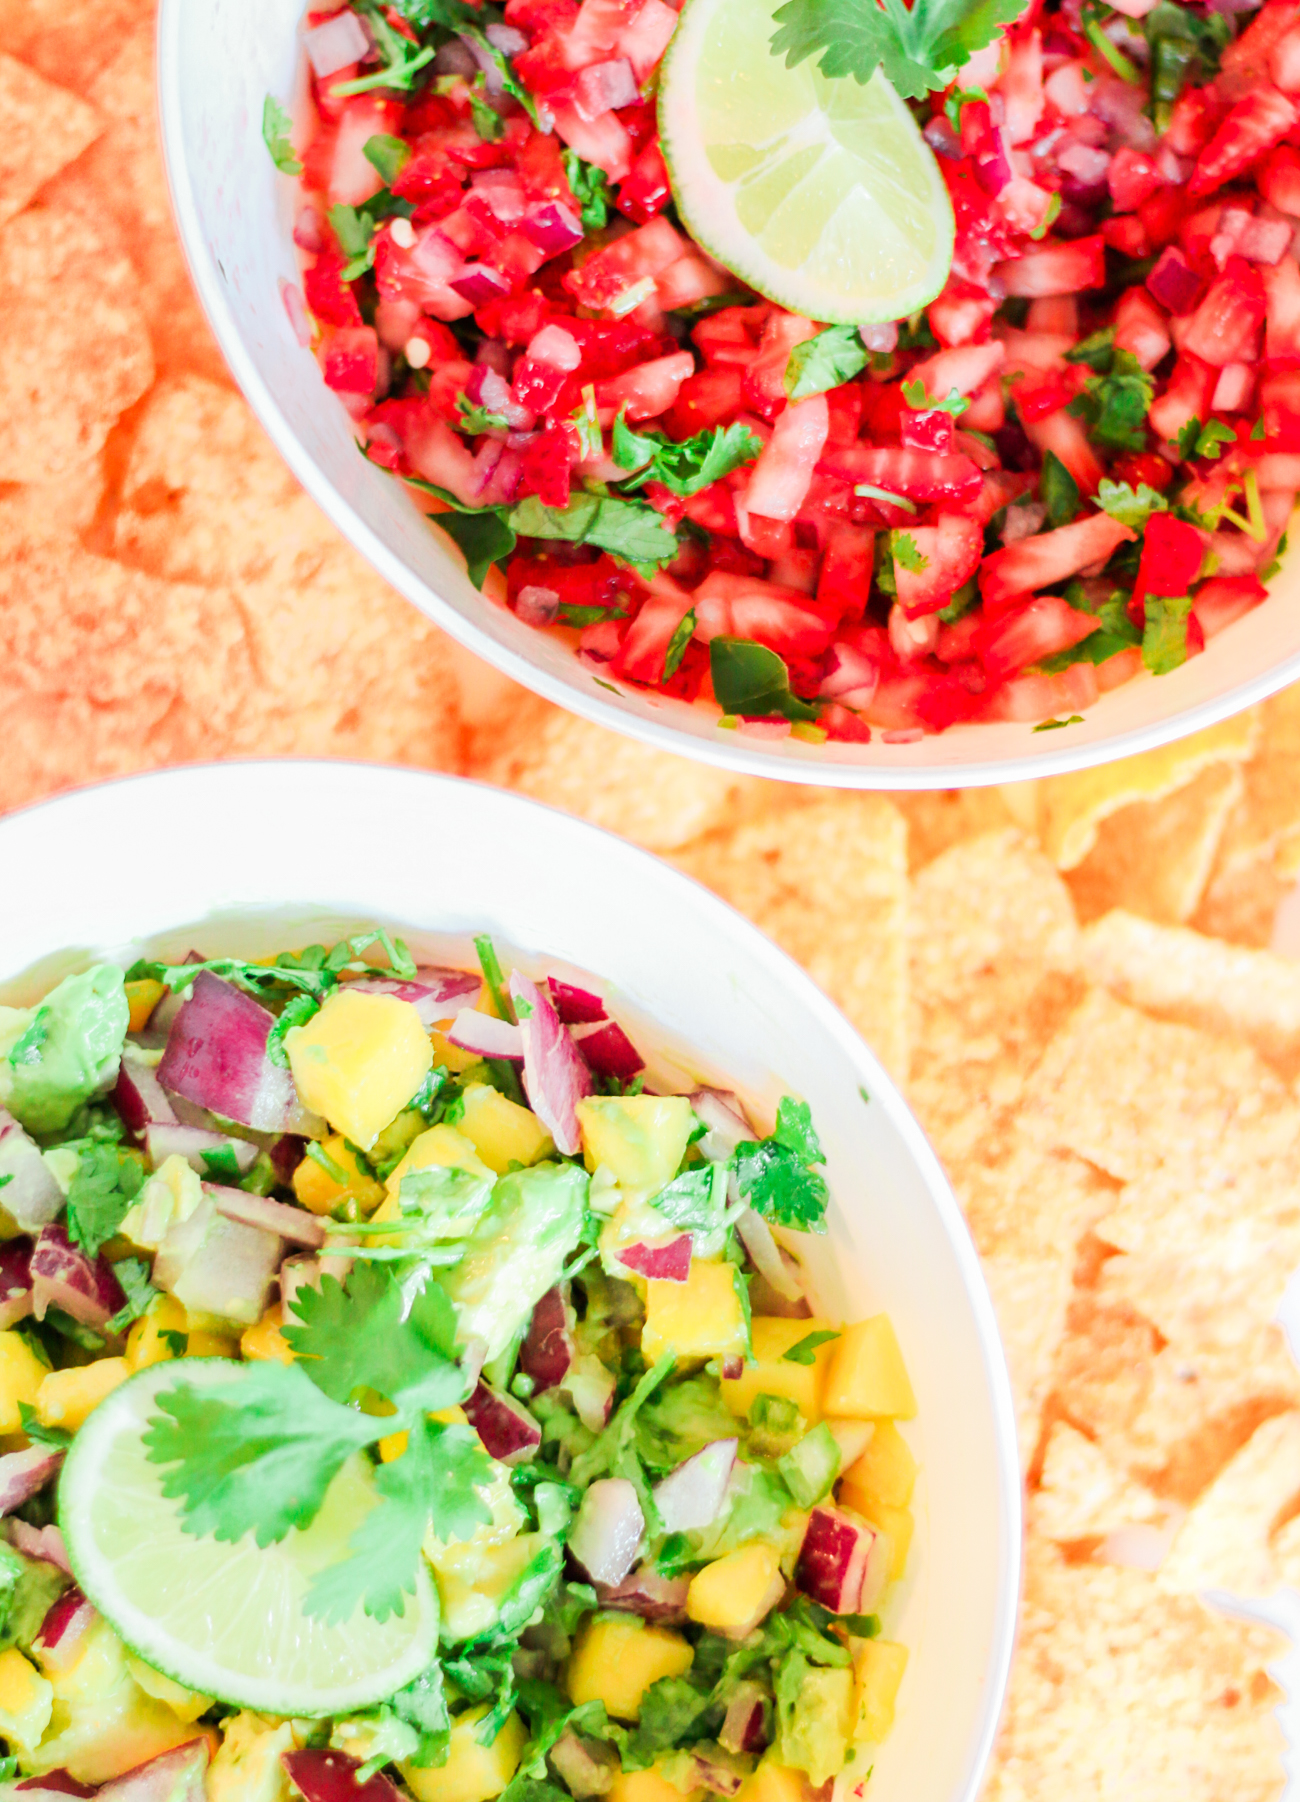 Two Quick Fresh Salsa Recipes for Your Cinco de Mayo Fiesta by southern lifestyle blogger Stephanie Ziajka from Diary of a Debutante, strawberry jalapeno salsa recipe, strawberry and jalapeno salsa recipe, homemade salsa recipe, easy Cinco de Mayo salsa recipe, fresh mango habanero salsa recipe, quick mango and avocado salsa